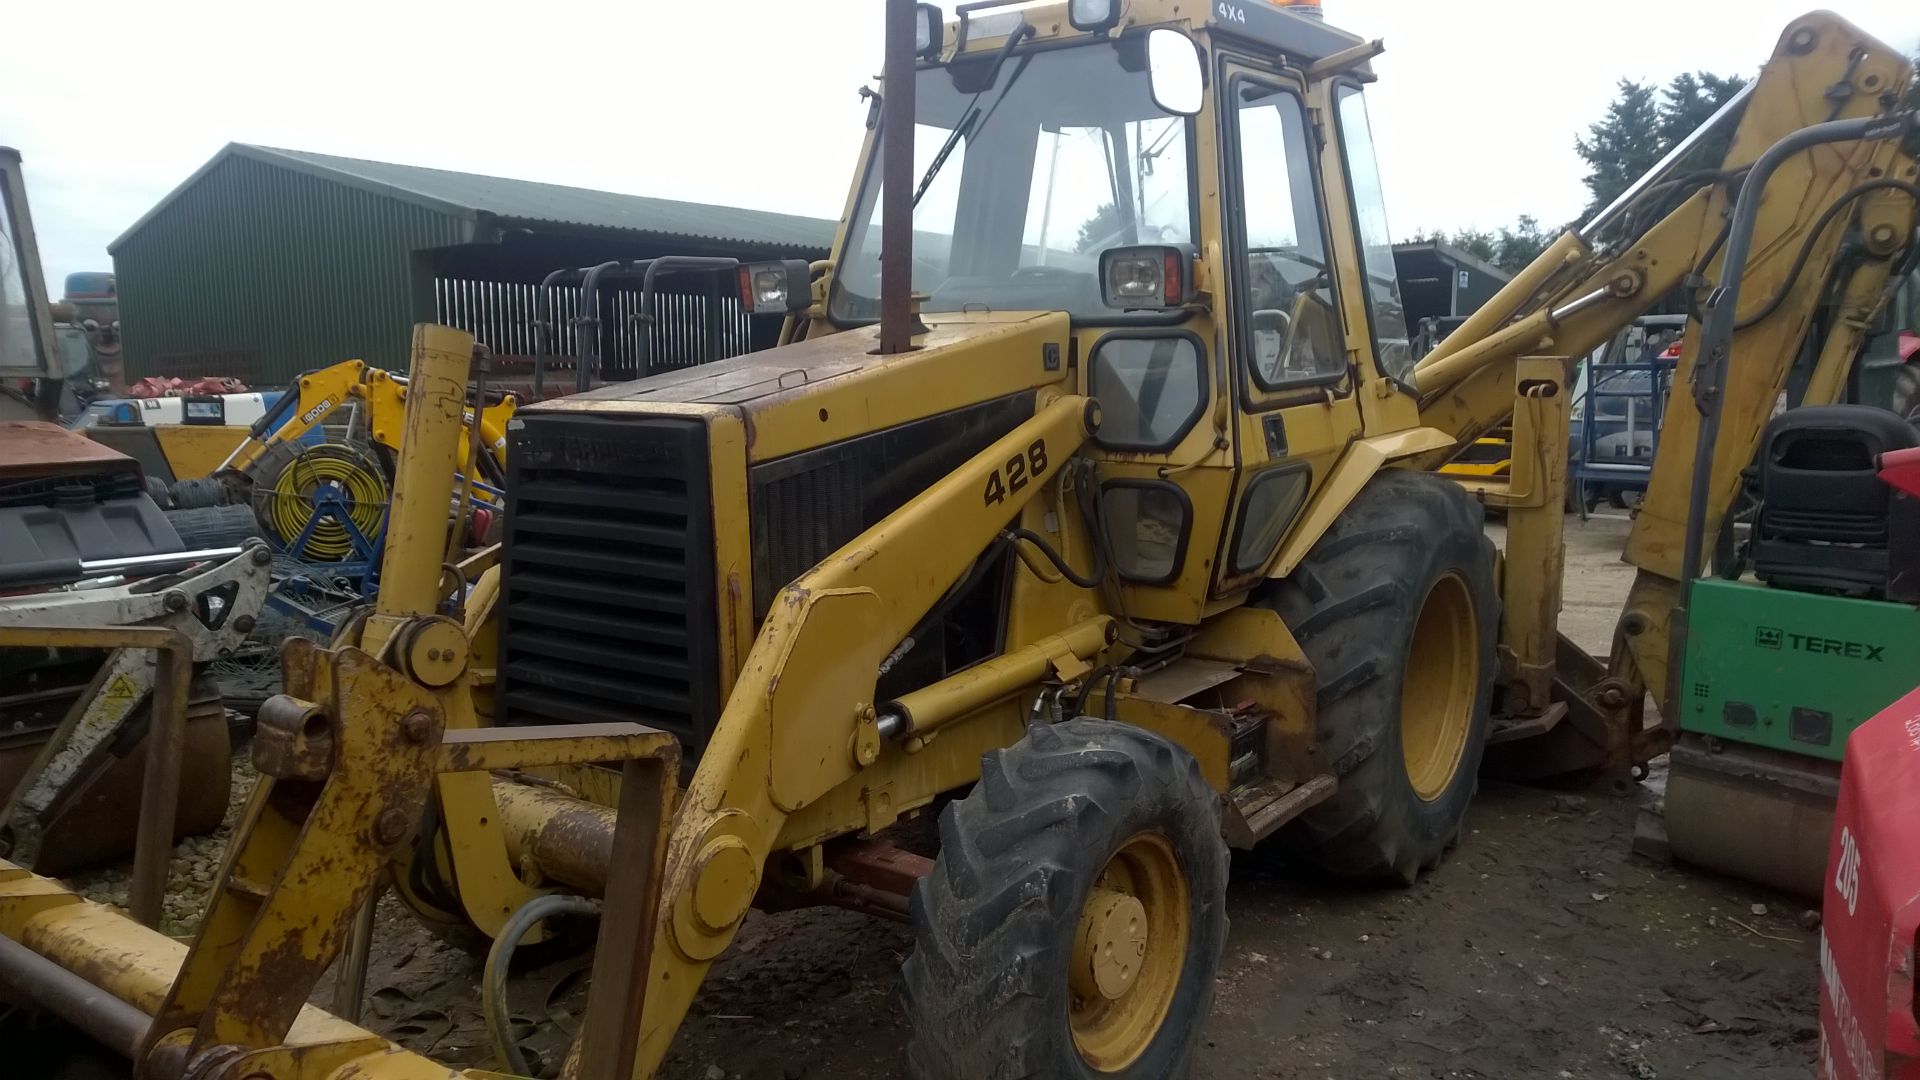 DS - 1988/F REG CATERPILLAR 428 4X4 EXCAVATOR/DIGGER - WITH A 4 IN 1 BUCKET *PLUS VAT*   SHOWING 1 - Image 5 of 13